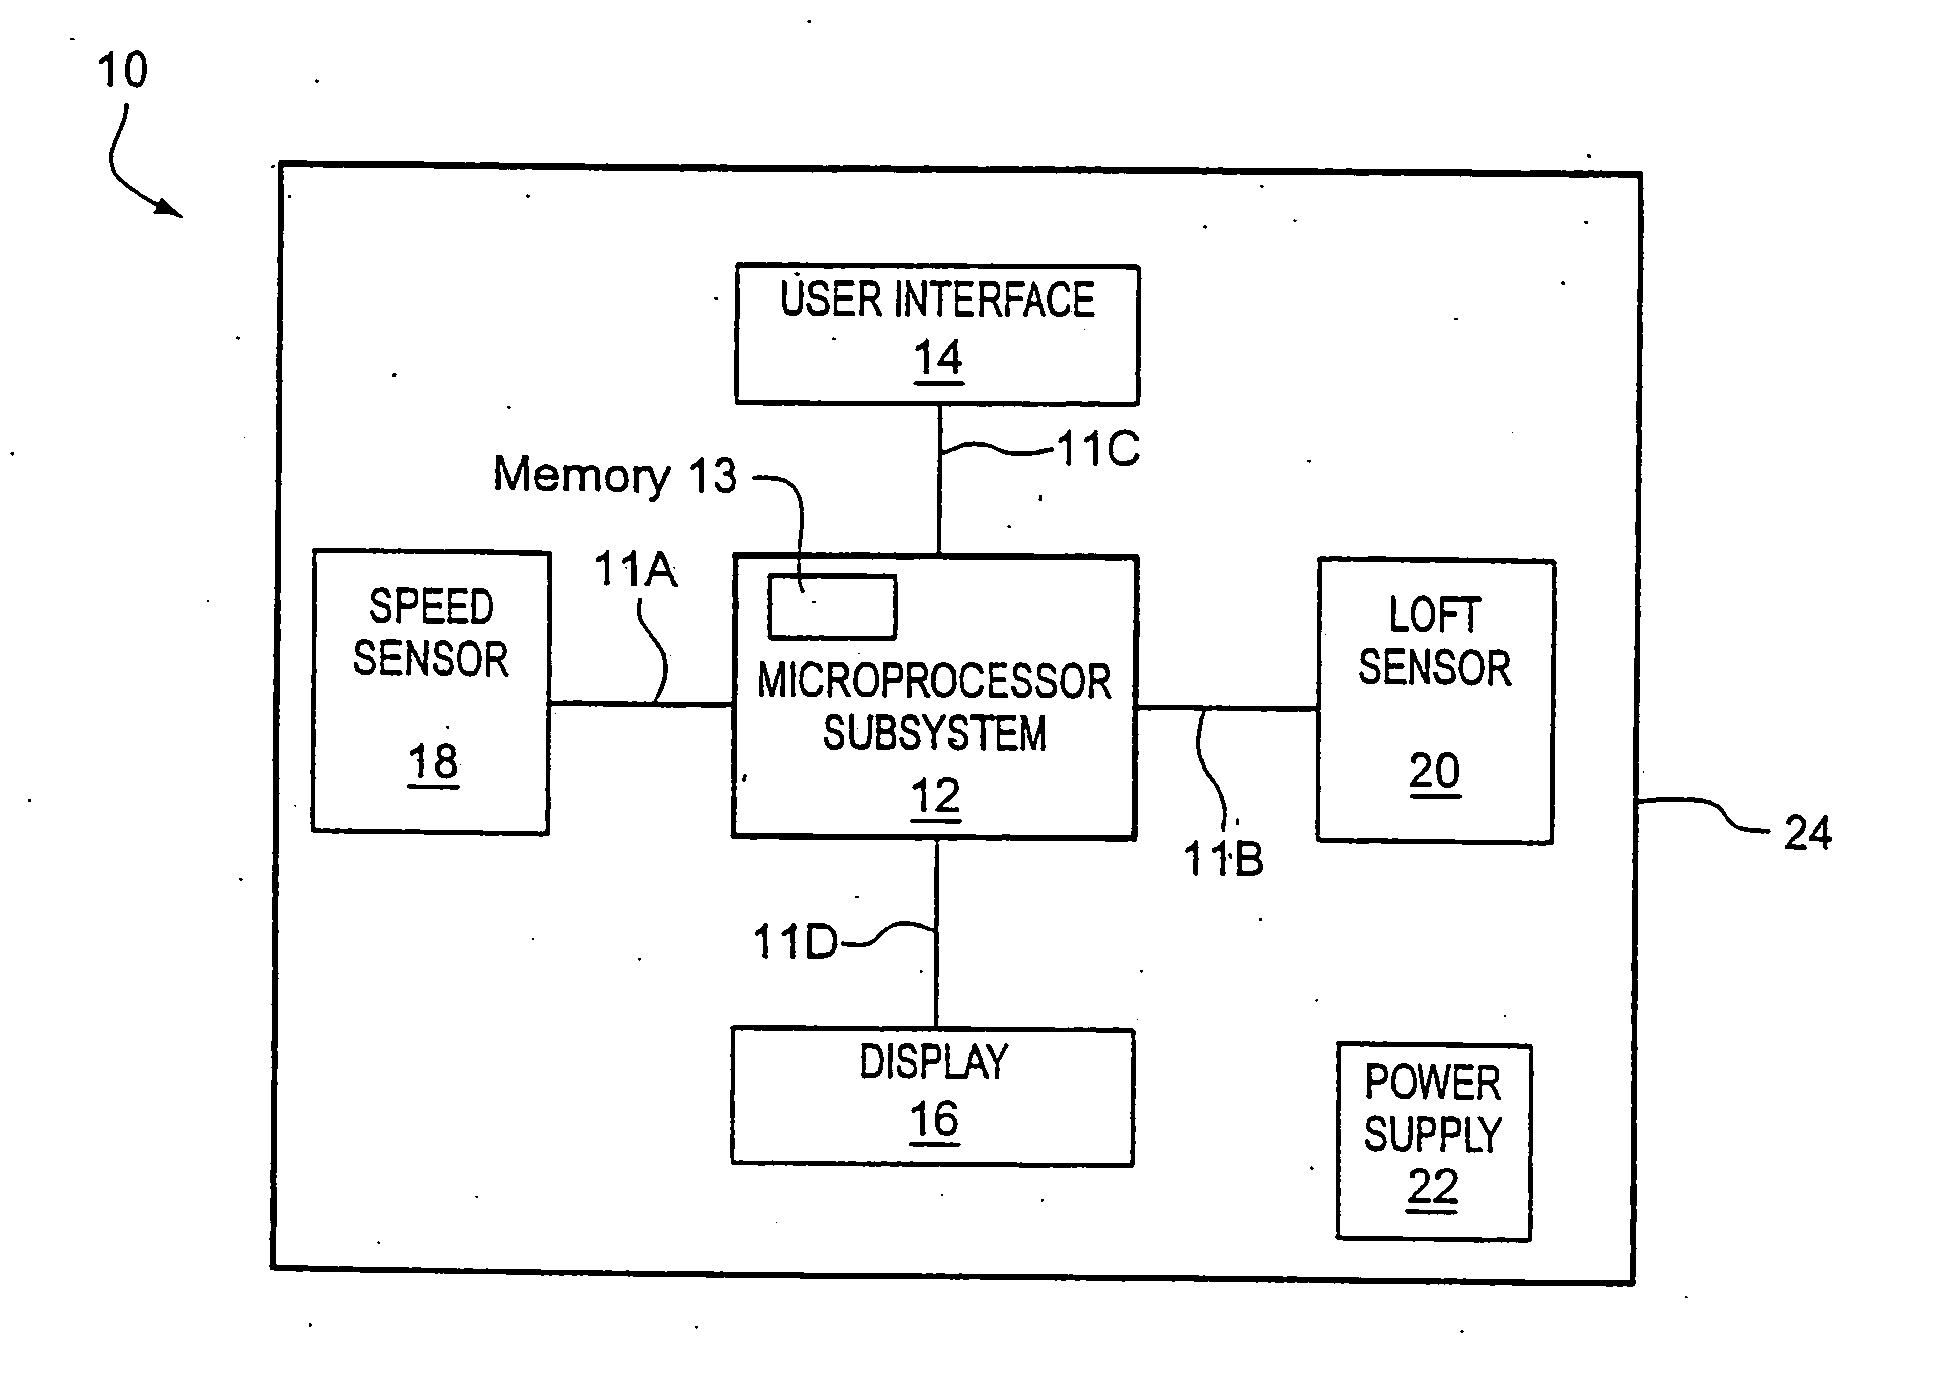 Movement monitoring systems and associated methods